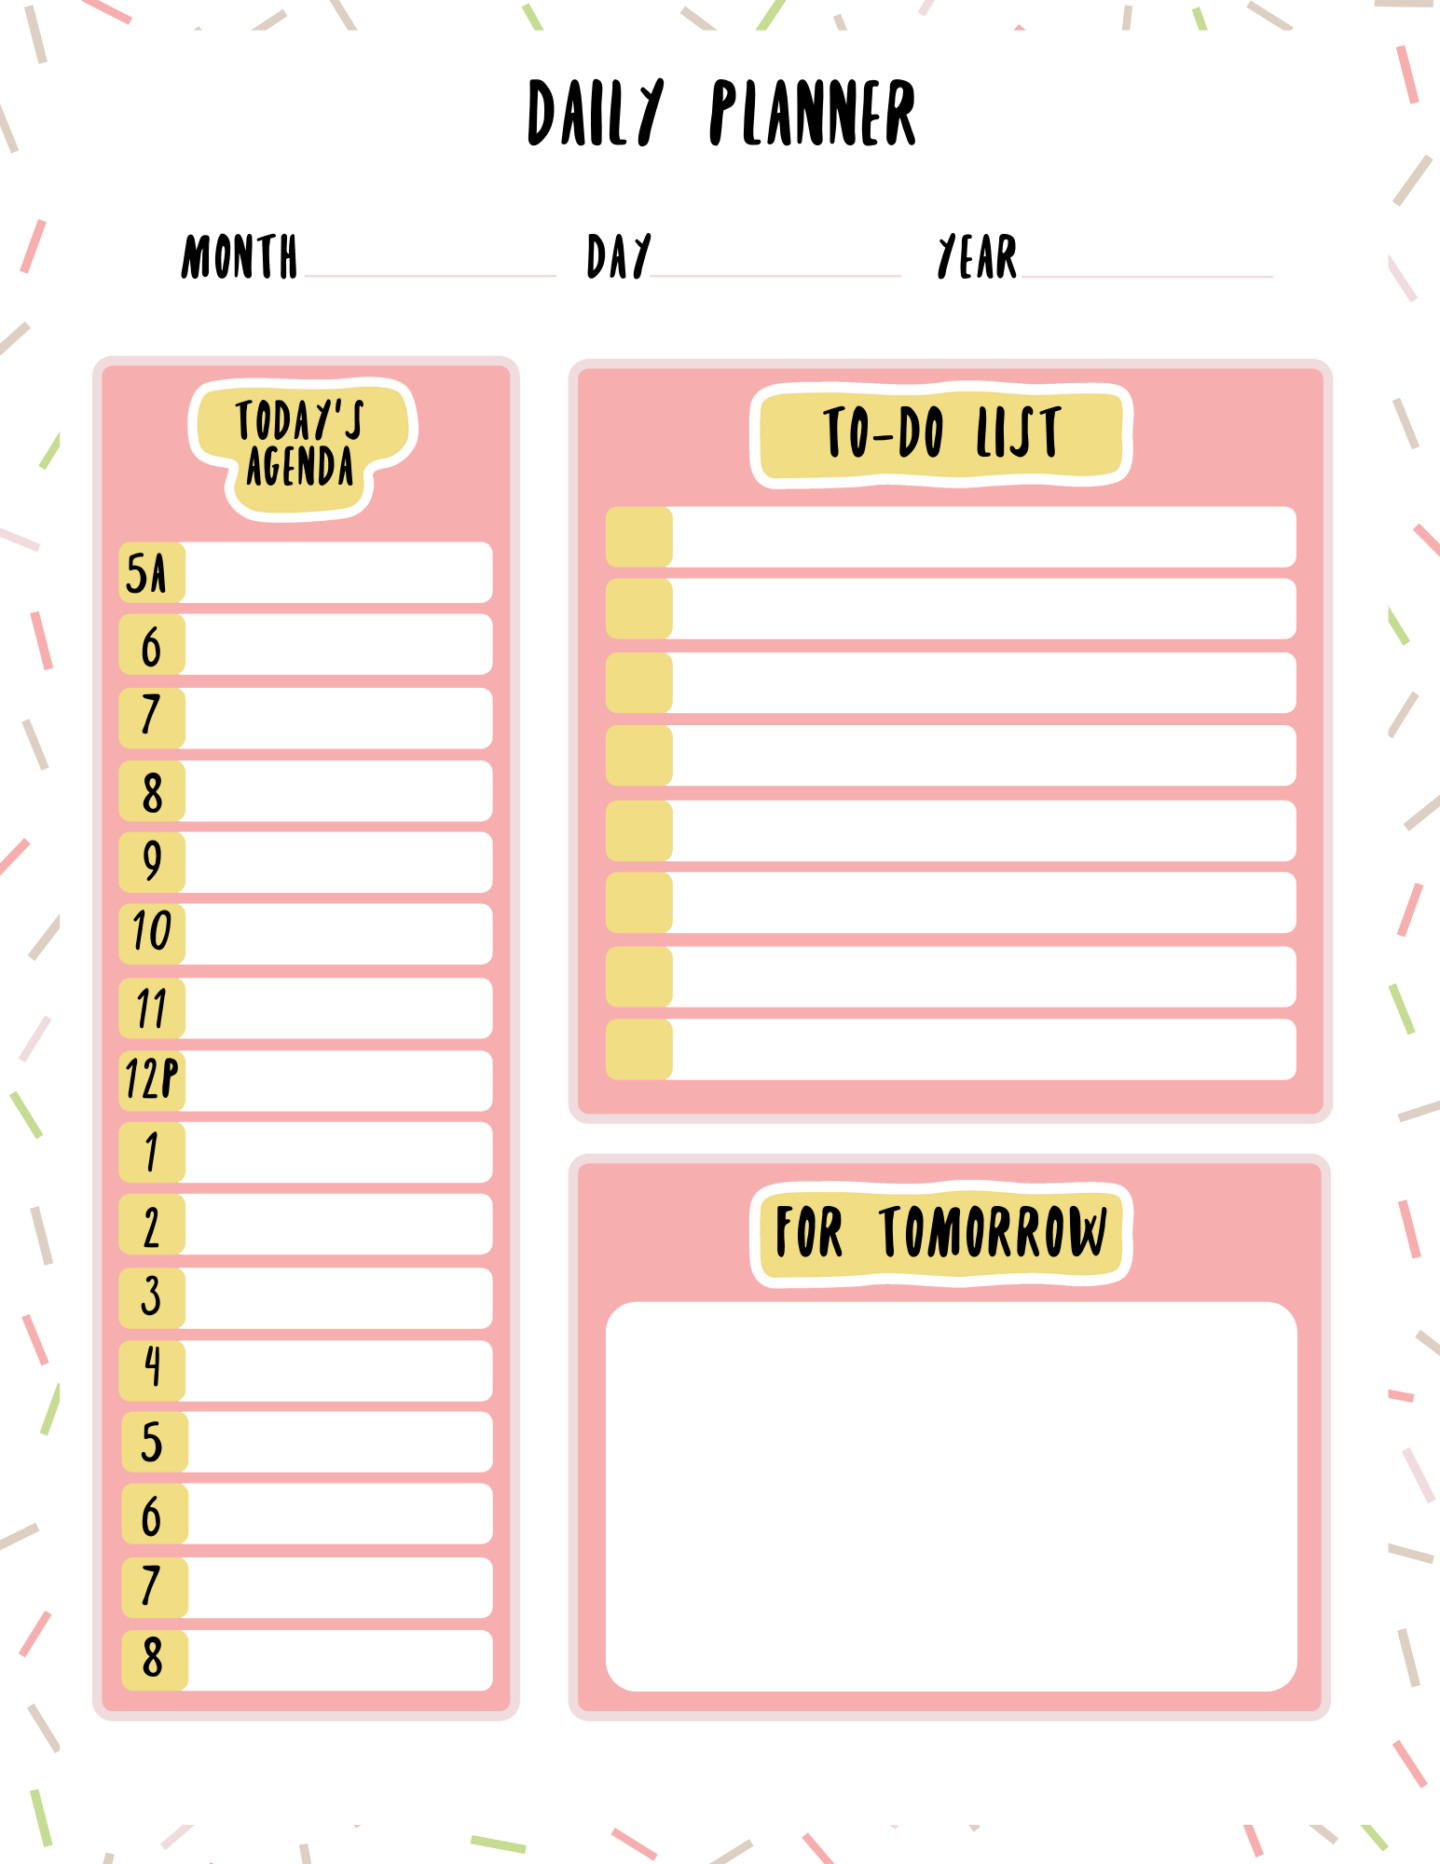 Free Planner Printables Weekly, Monthly & Daily Adanna Dill